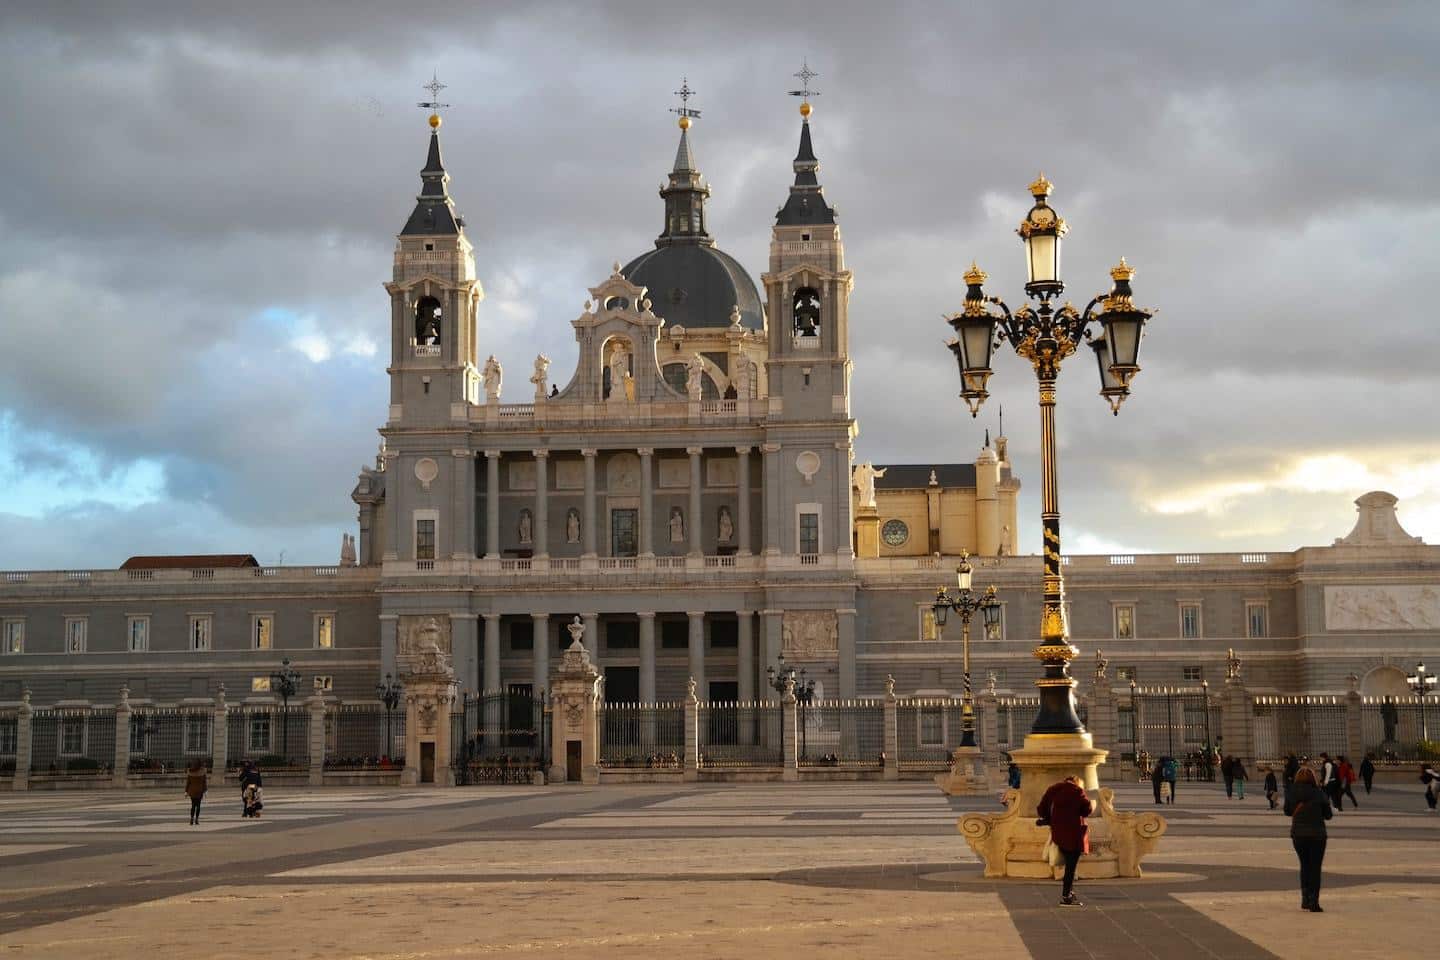 View of the large royal palace madrid from the plaza